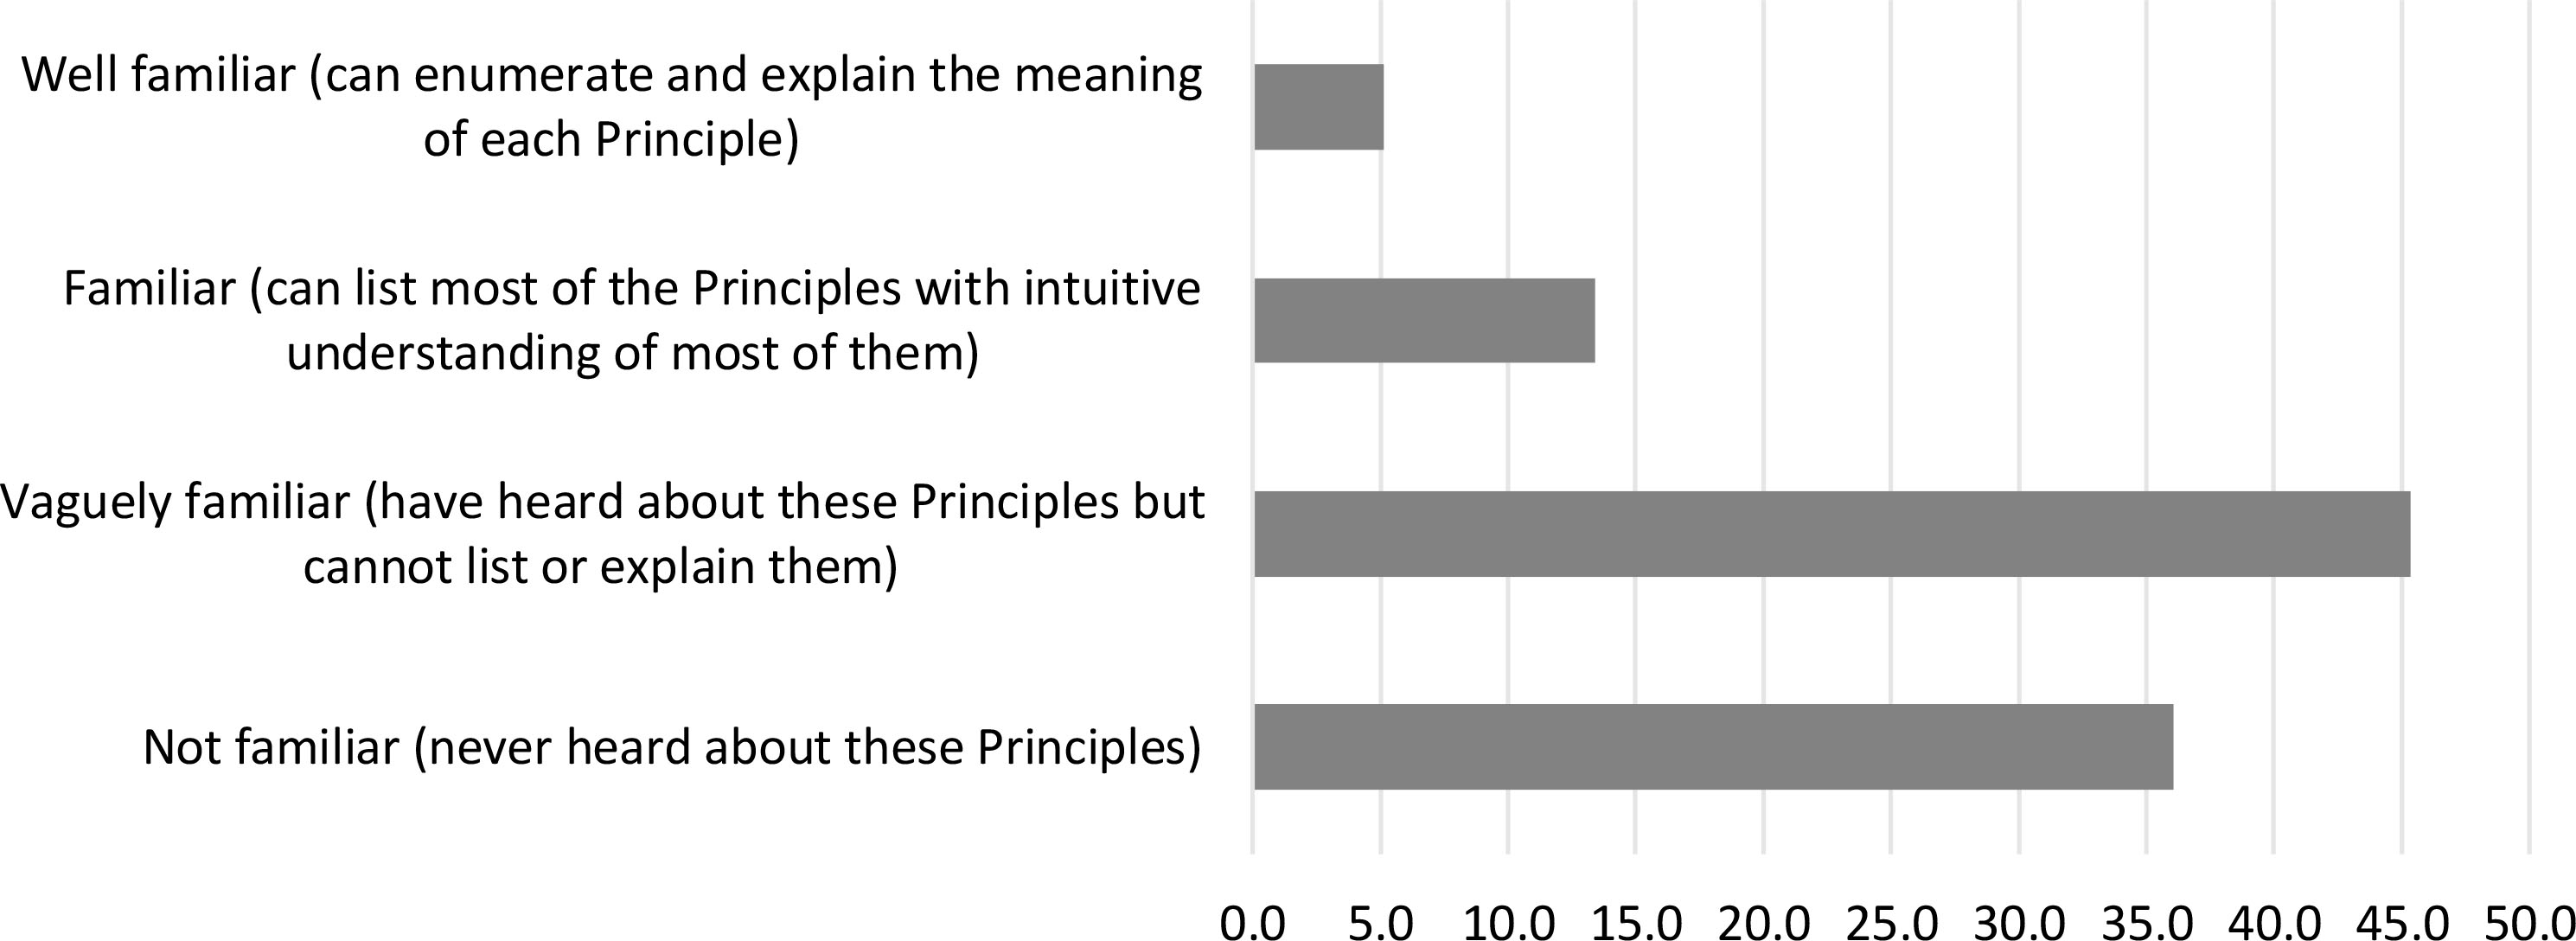 Are you familiar with UN Fundamental Principles of Official Statistics? (% of respondents).